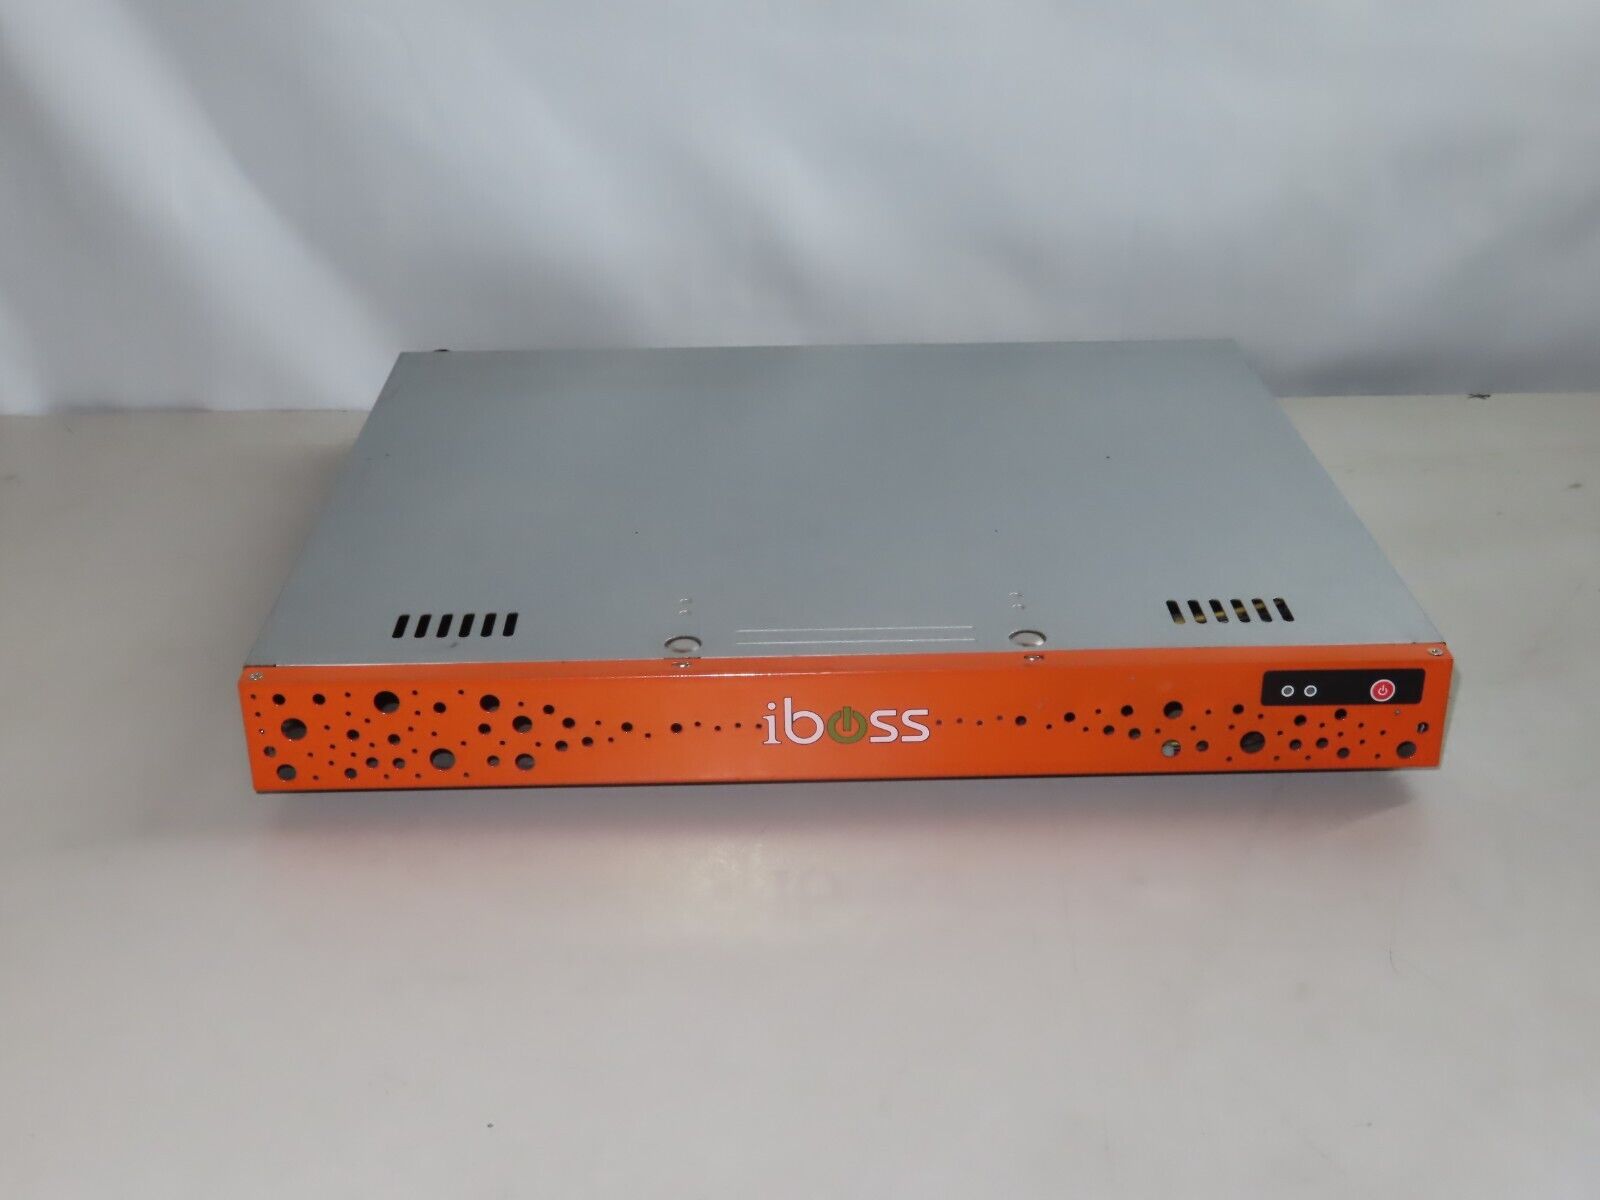 iboss Enterprise 14600 Web Security ** NO HHD, NO RAM ** - AS-IS for PARTS